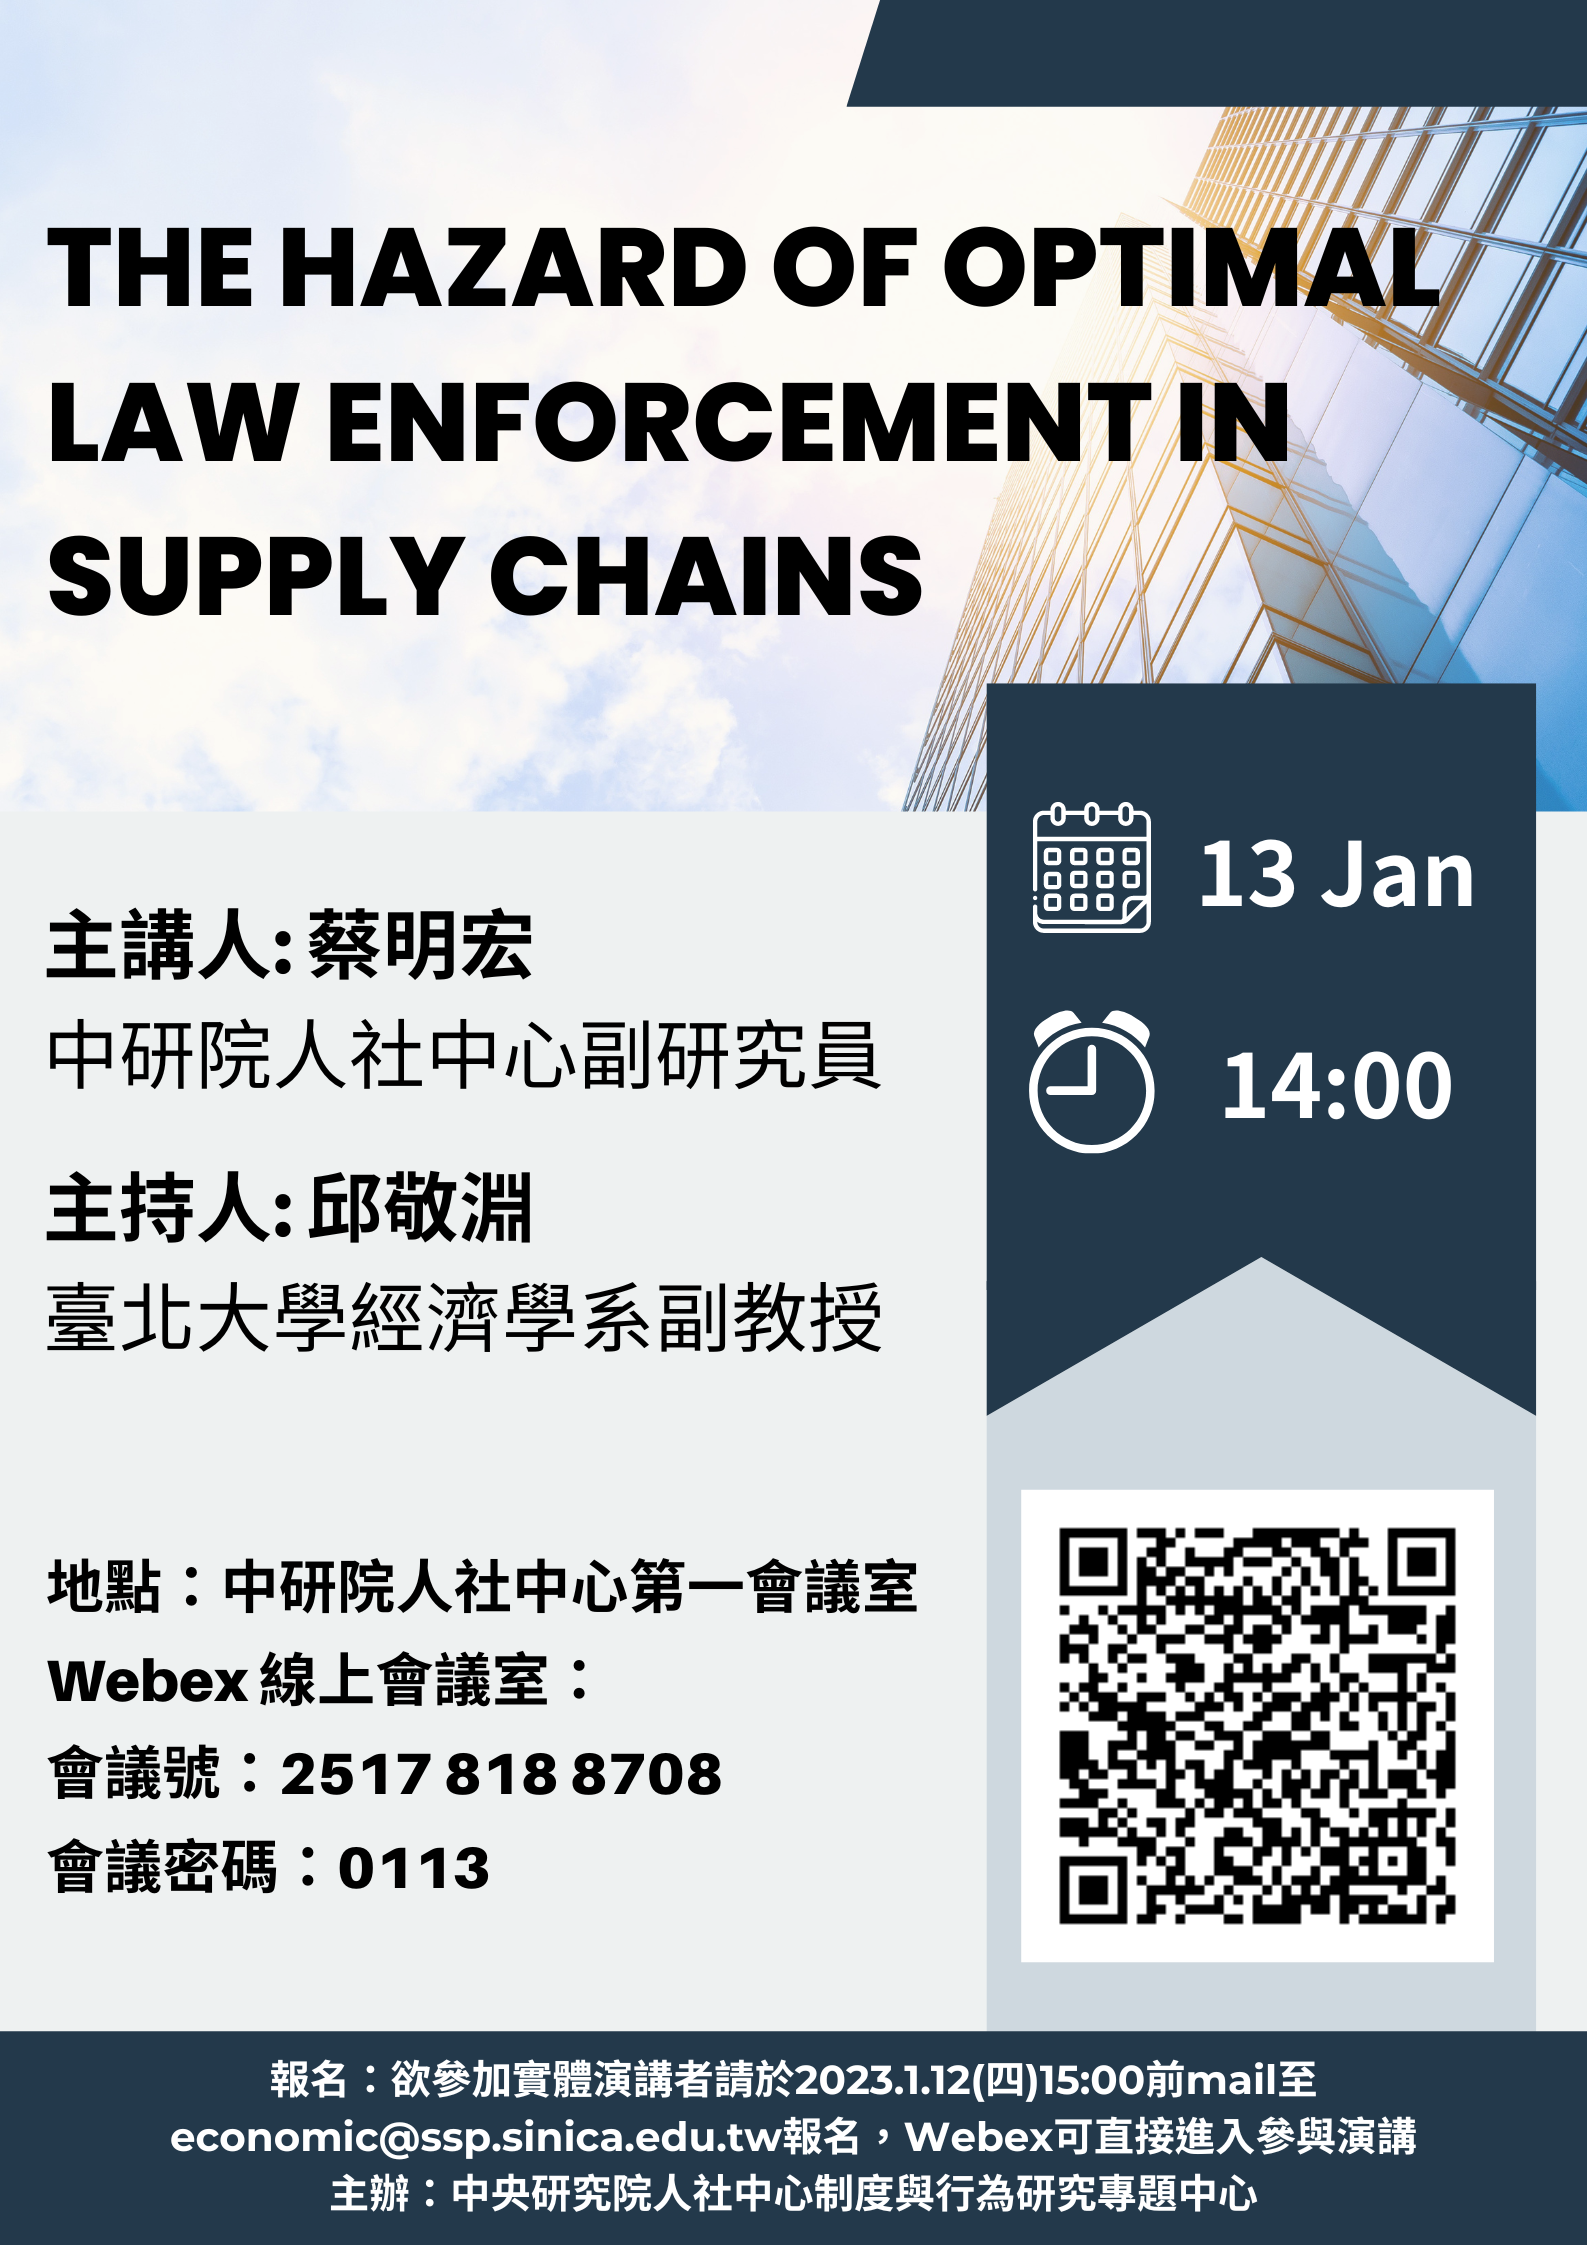 *The Hazard of Optimal Law Enforcement in Supply Chains